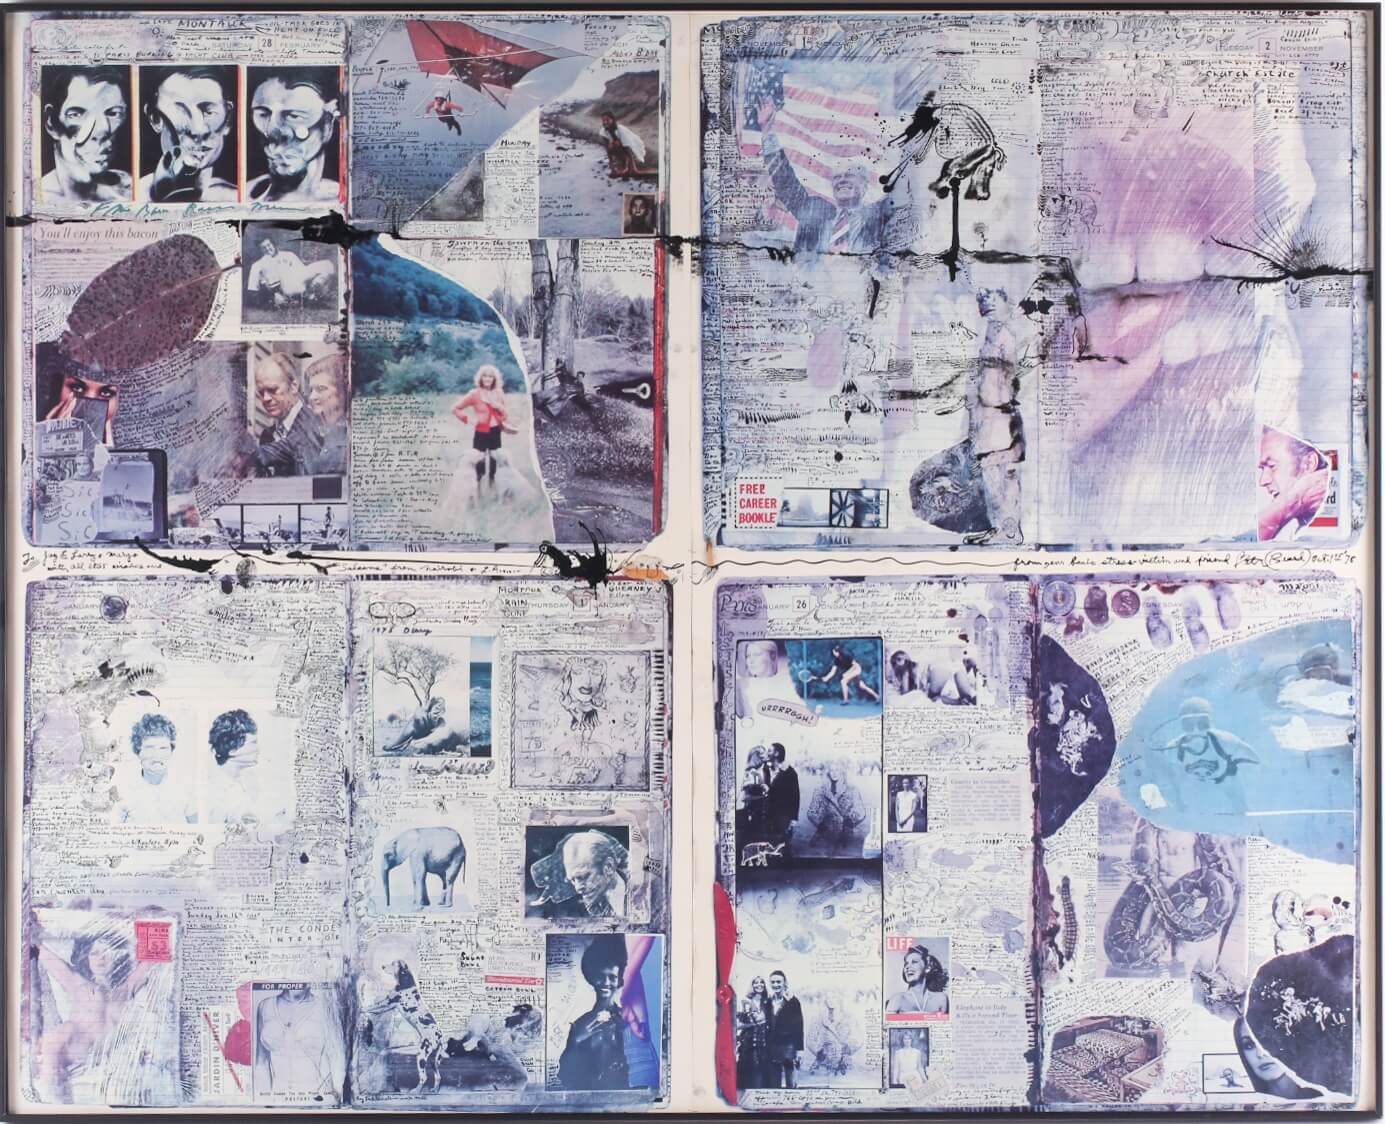 Peter Beard Diary pages